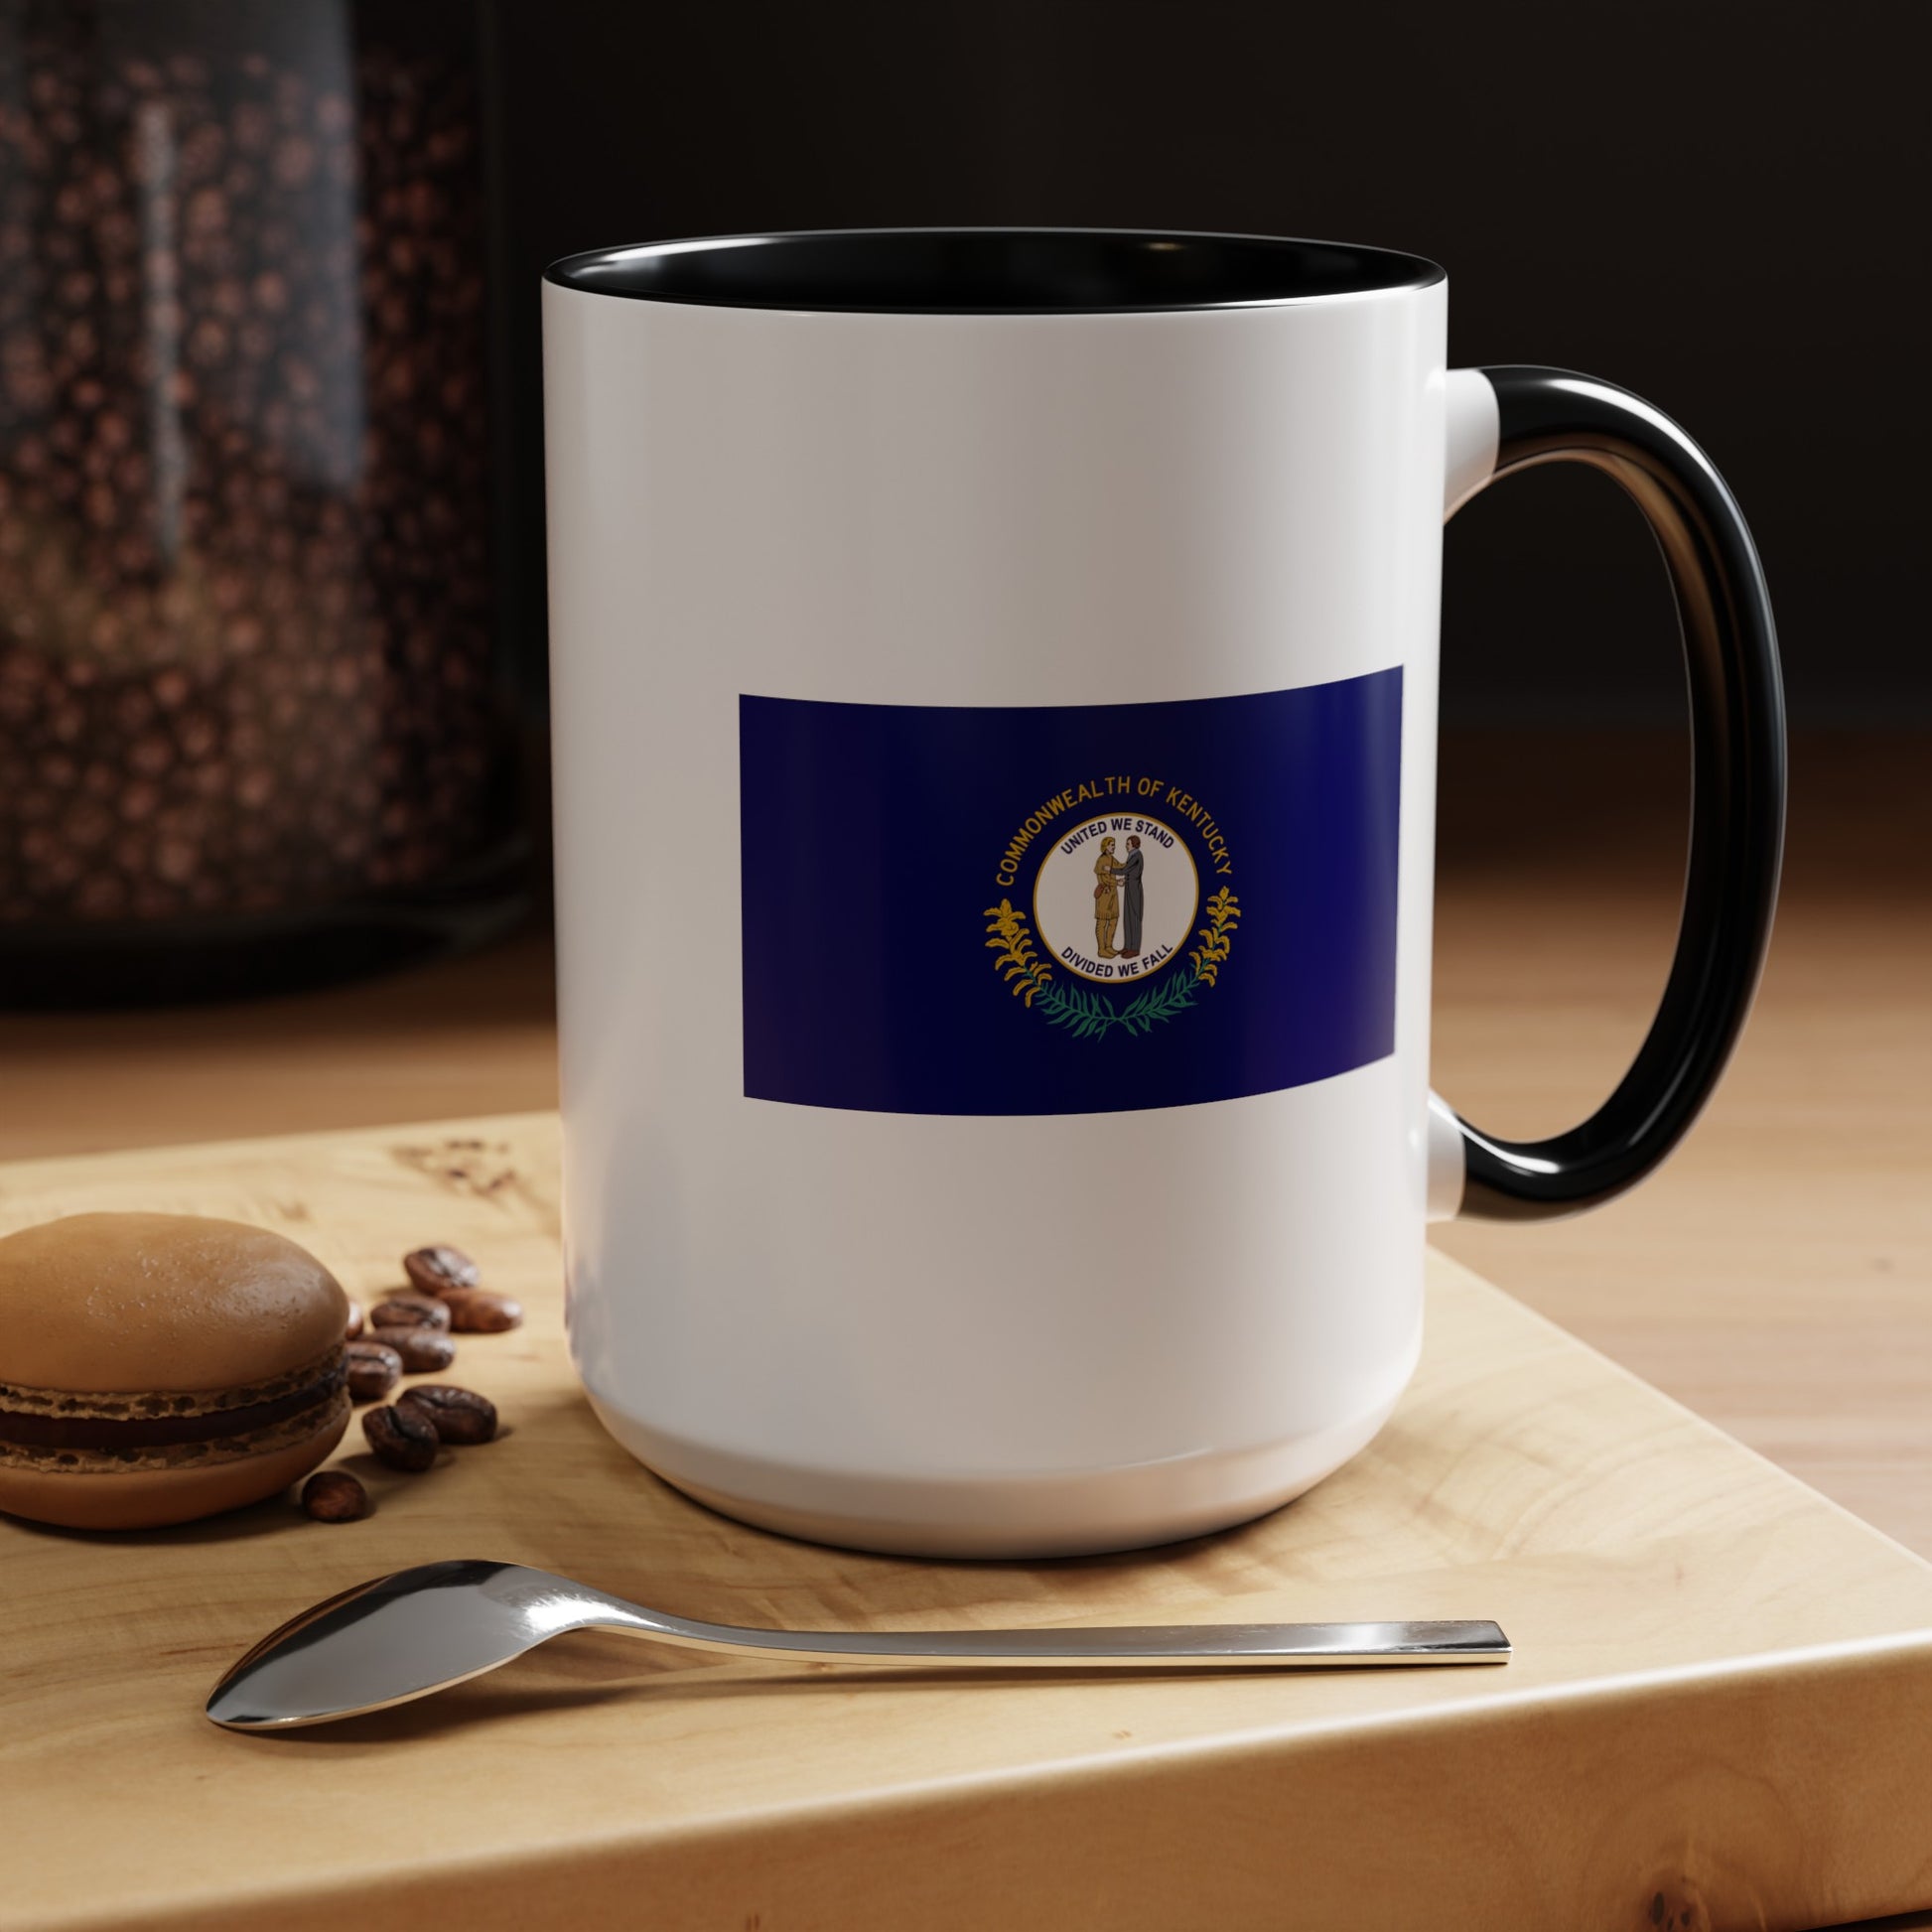 Commonwealth of Kentucky State Flag - Double Sided Black Accent White Ceramic Coffee Mug 15oz by TheGlassyLass.com